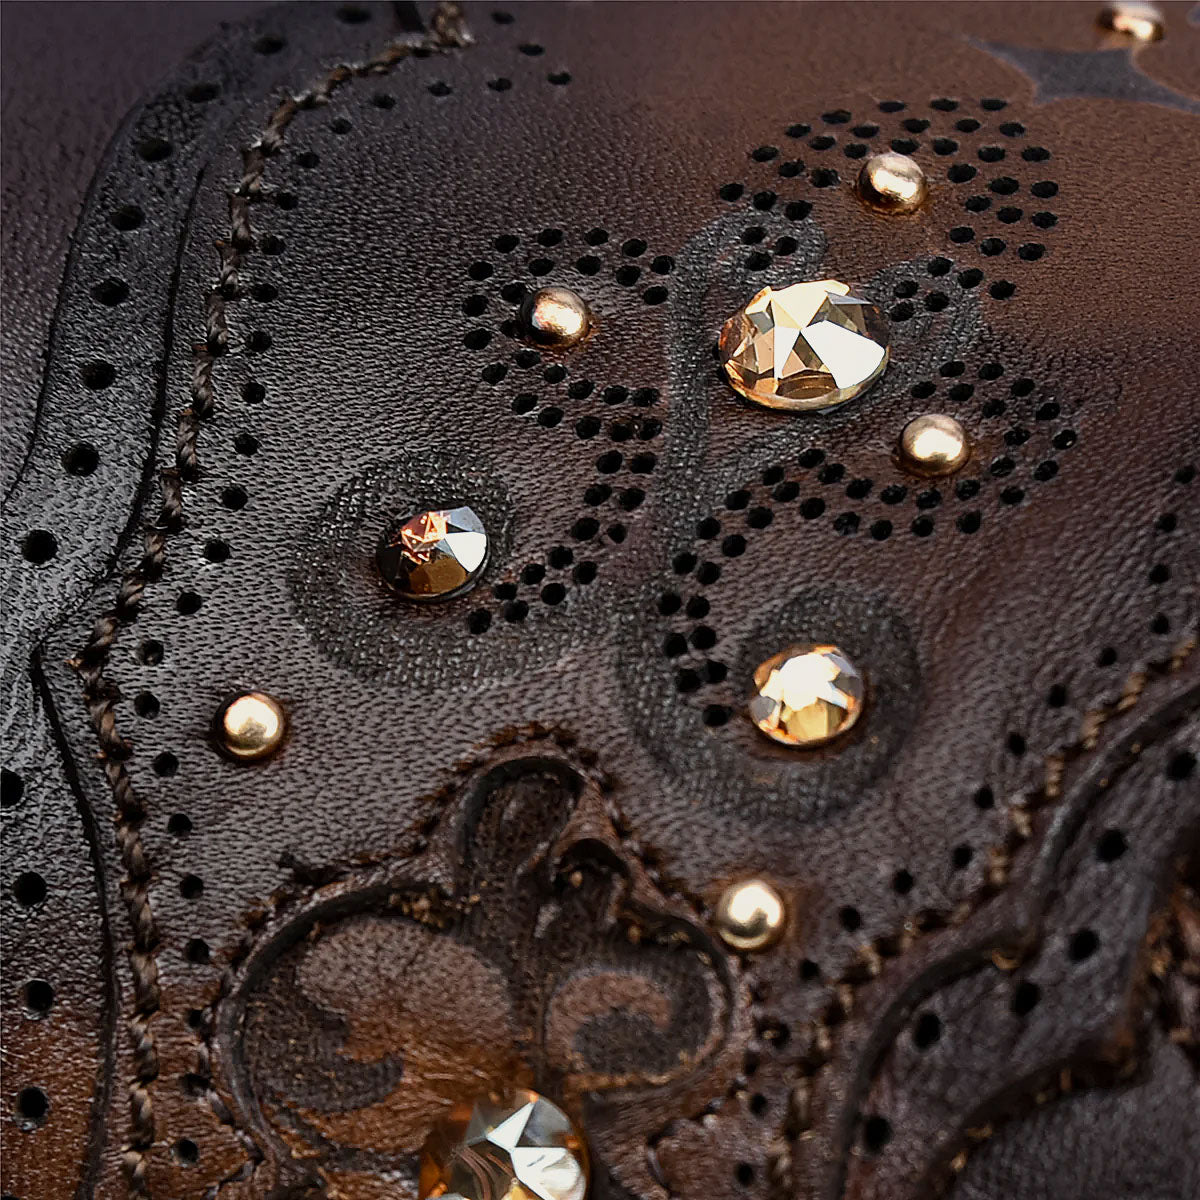 The harness is adorned with crystals, metallic studs, and laser engravings, exuding intricate elegance.